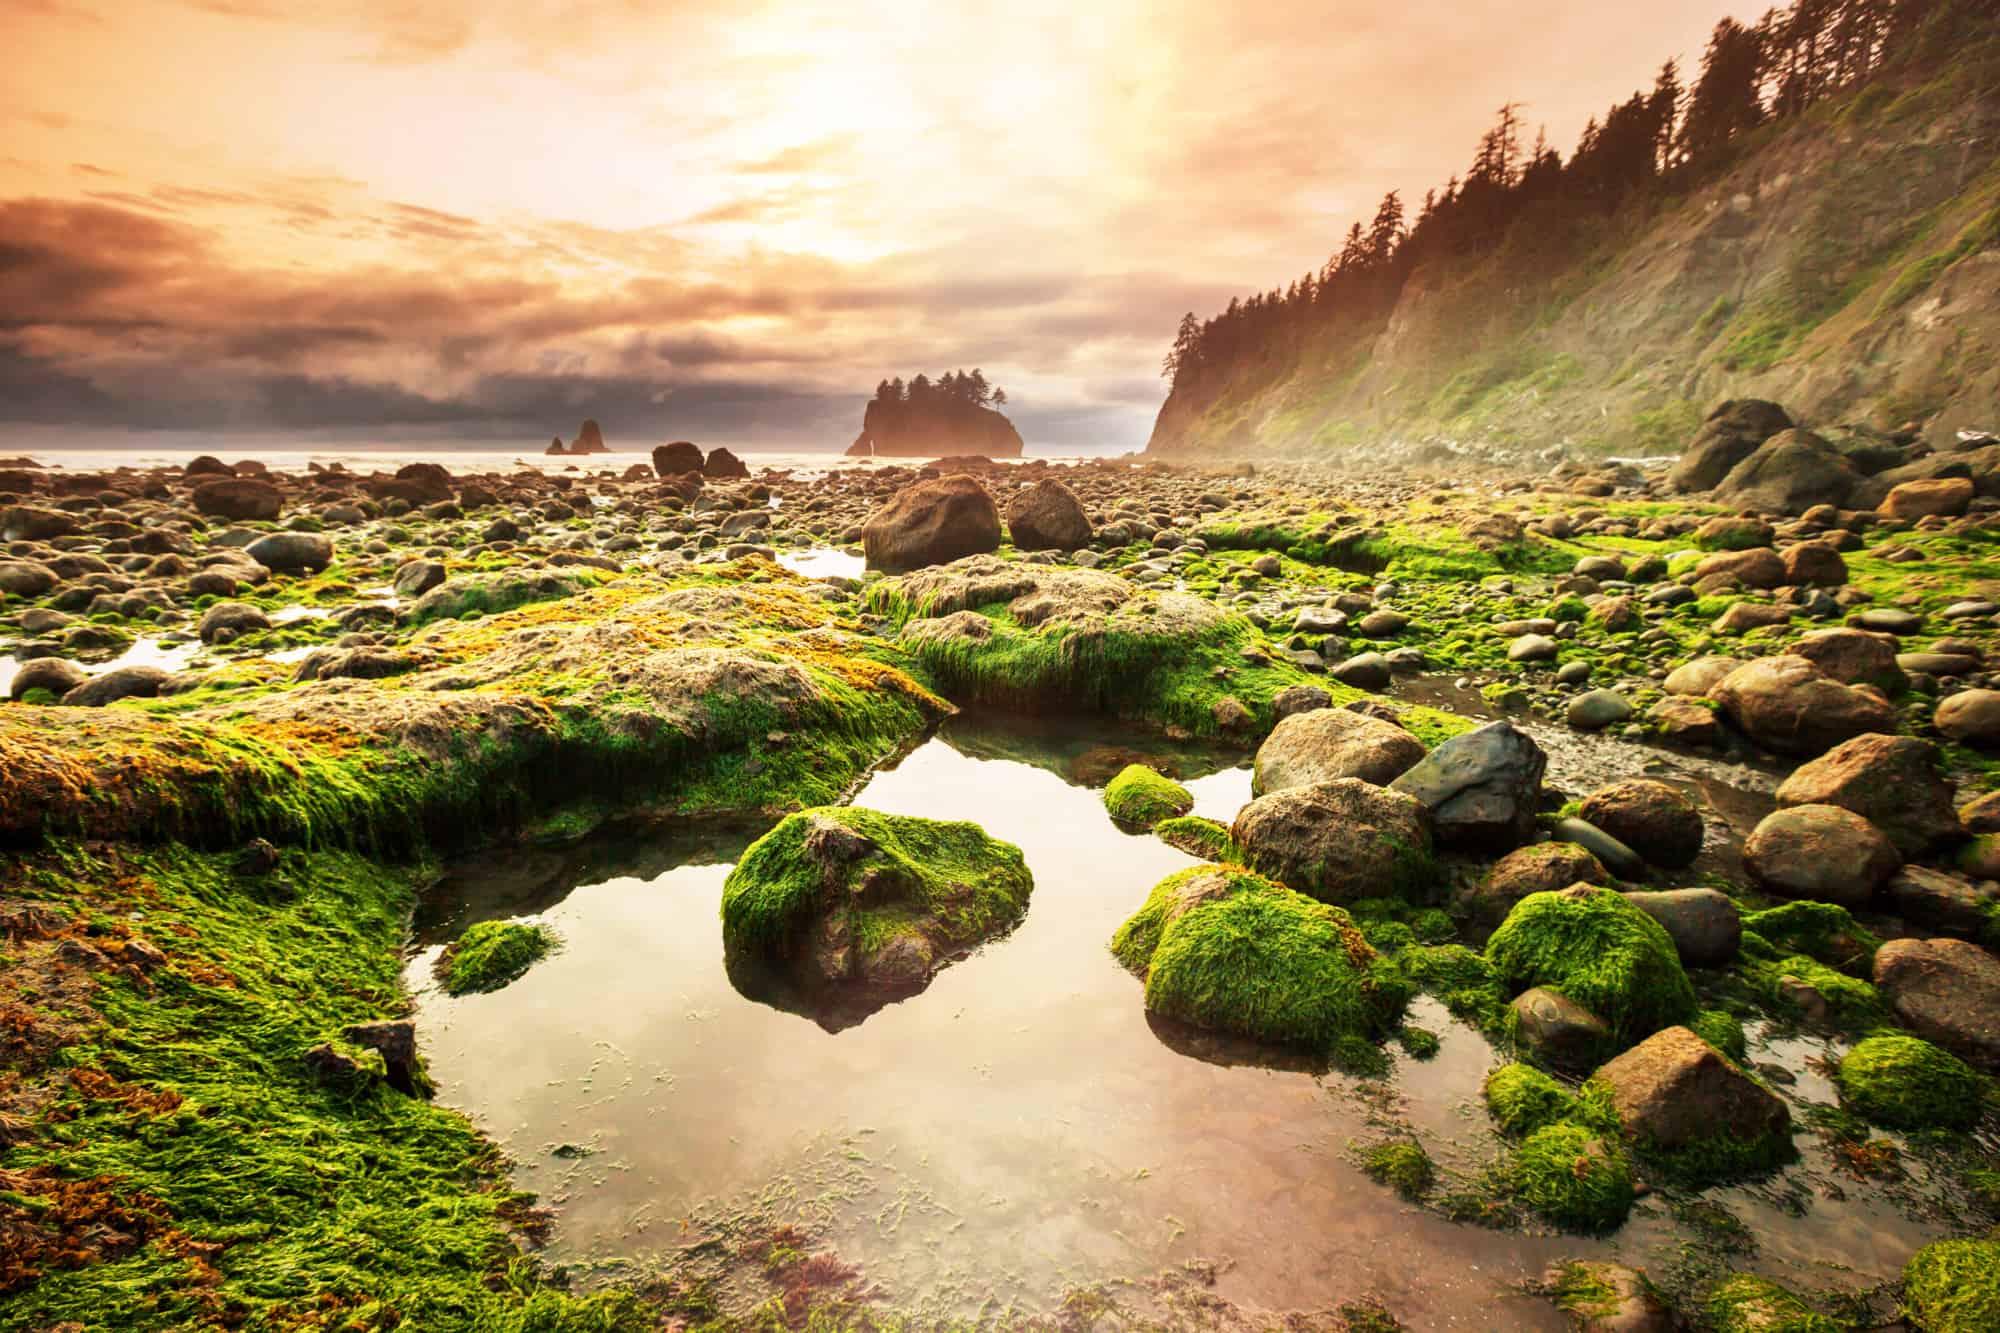 a tide pool can be seen at the front of the image surrounded by mossy rocks with the pacific ocean and seastacks in the background, olympic national park tide pools can be found at many of the beaches along the coast